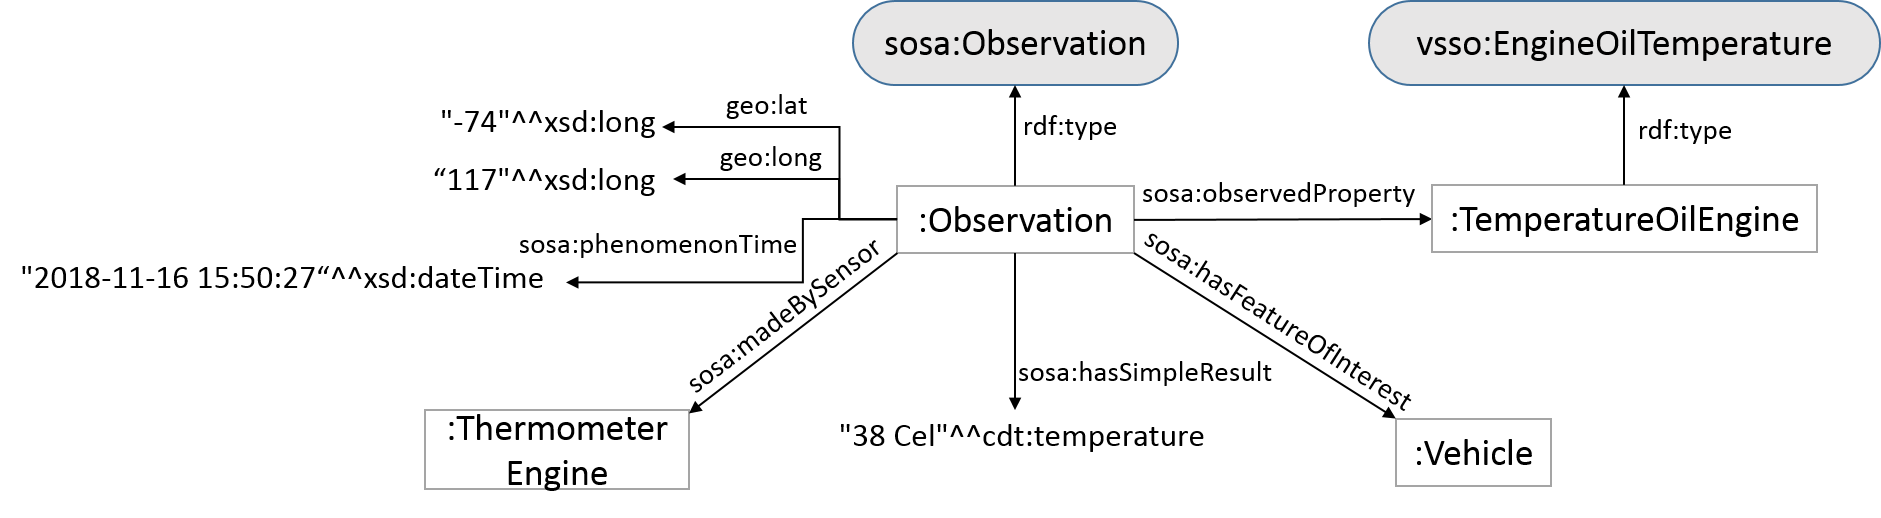 Example of a sosa:Observation of a VSSo signal